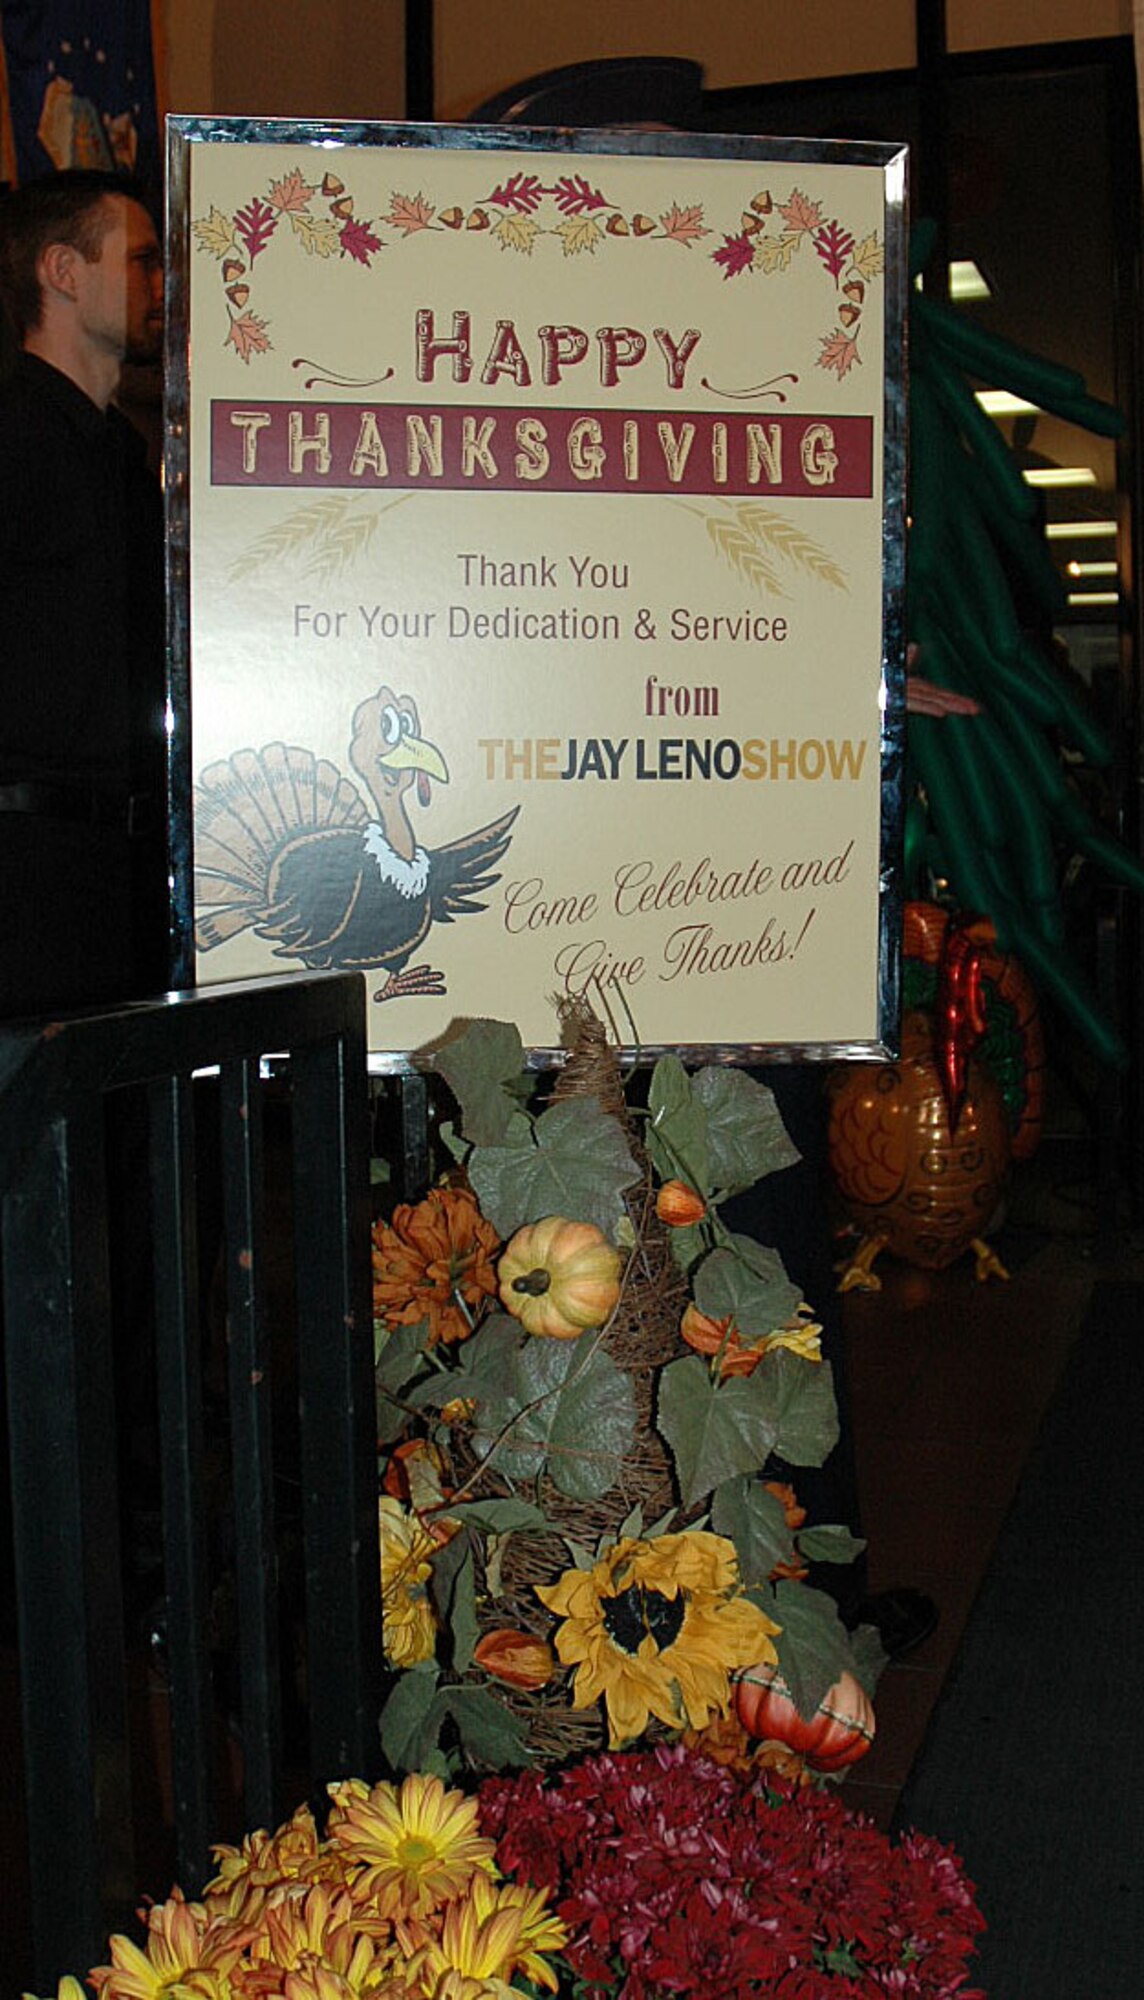 A special sign welcomes members from various military bases in Southern California, including Los Angeles Air Force Base, who took part in the Jay Leno Show’s all-military tribute on Thanksgiving Day, Nov. 26. After watching the show in NBC Studios, Burbank, Calif., everyone was served a home-cooked meal, complete with ornate decorations set up by Jay’s staff. (Photo by 2nd Lt. Mara Title)